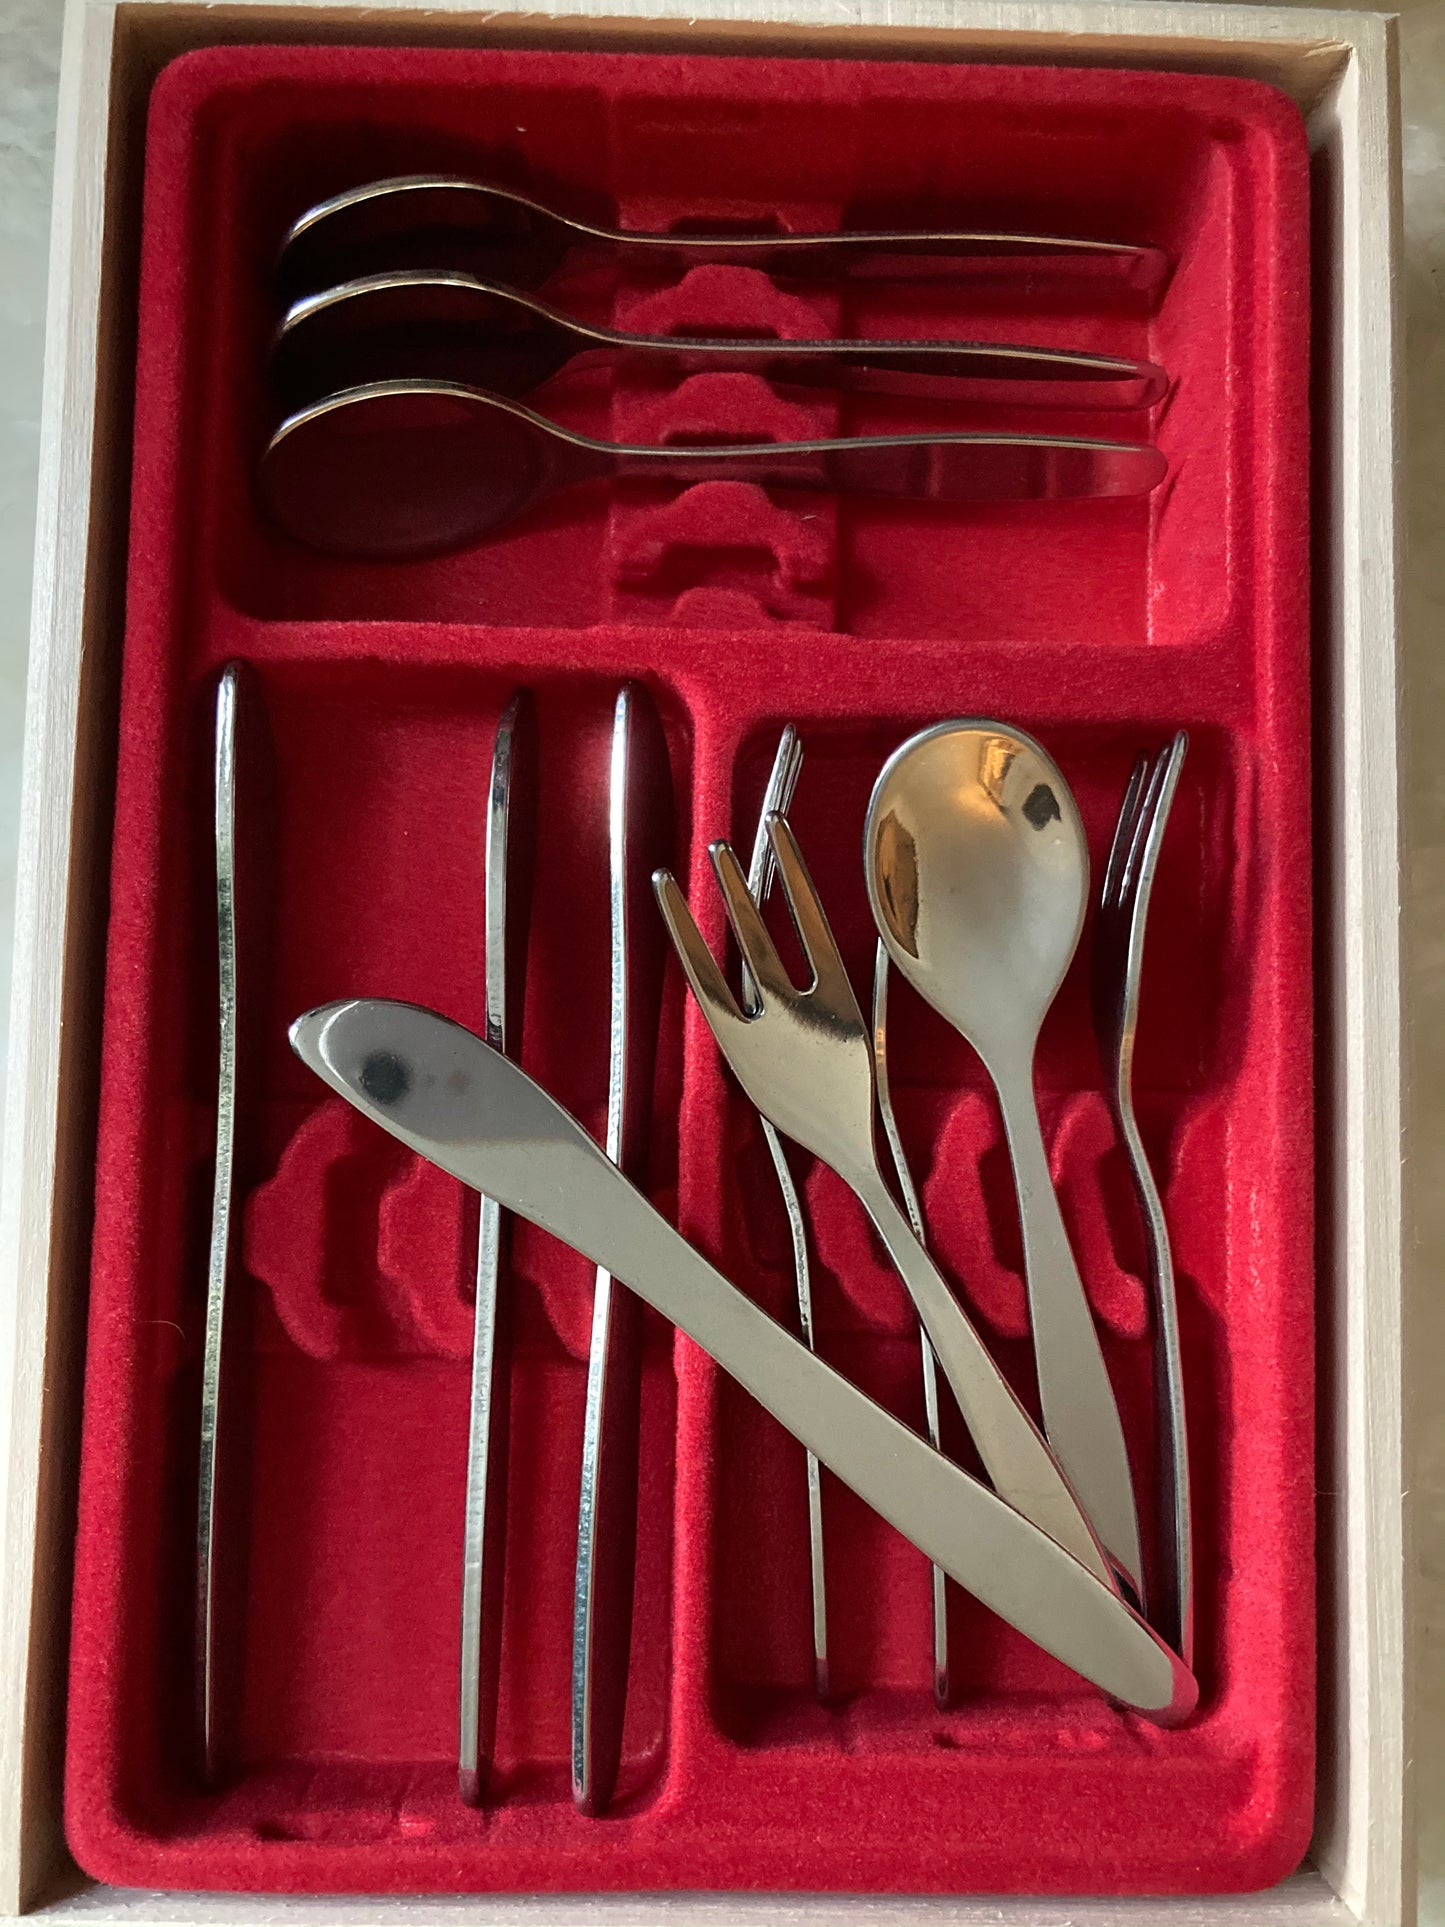 Keeping House - Child's CUTLERY SET (12 pieces)